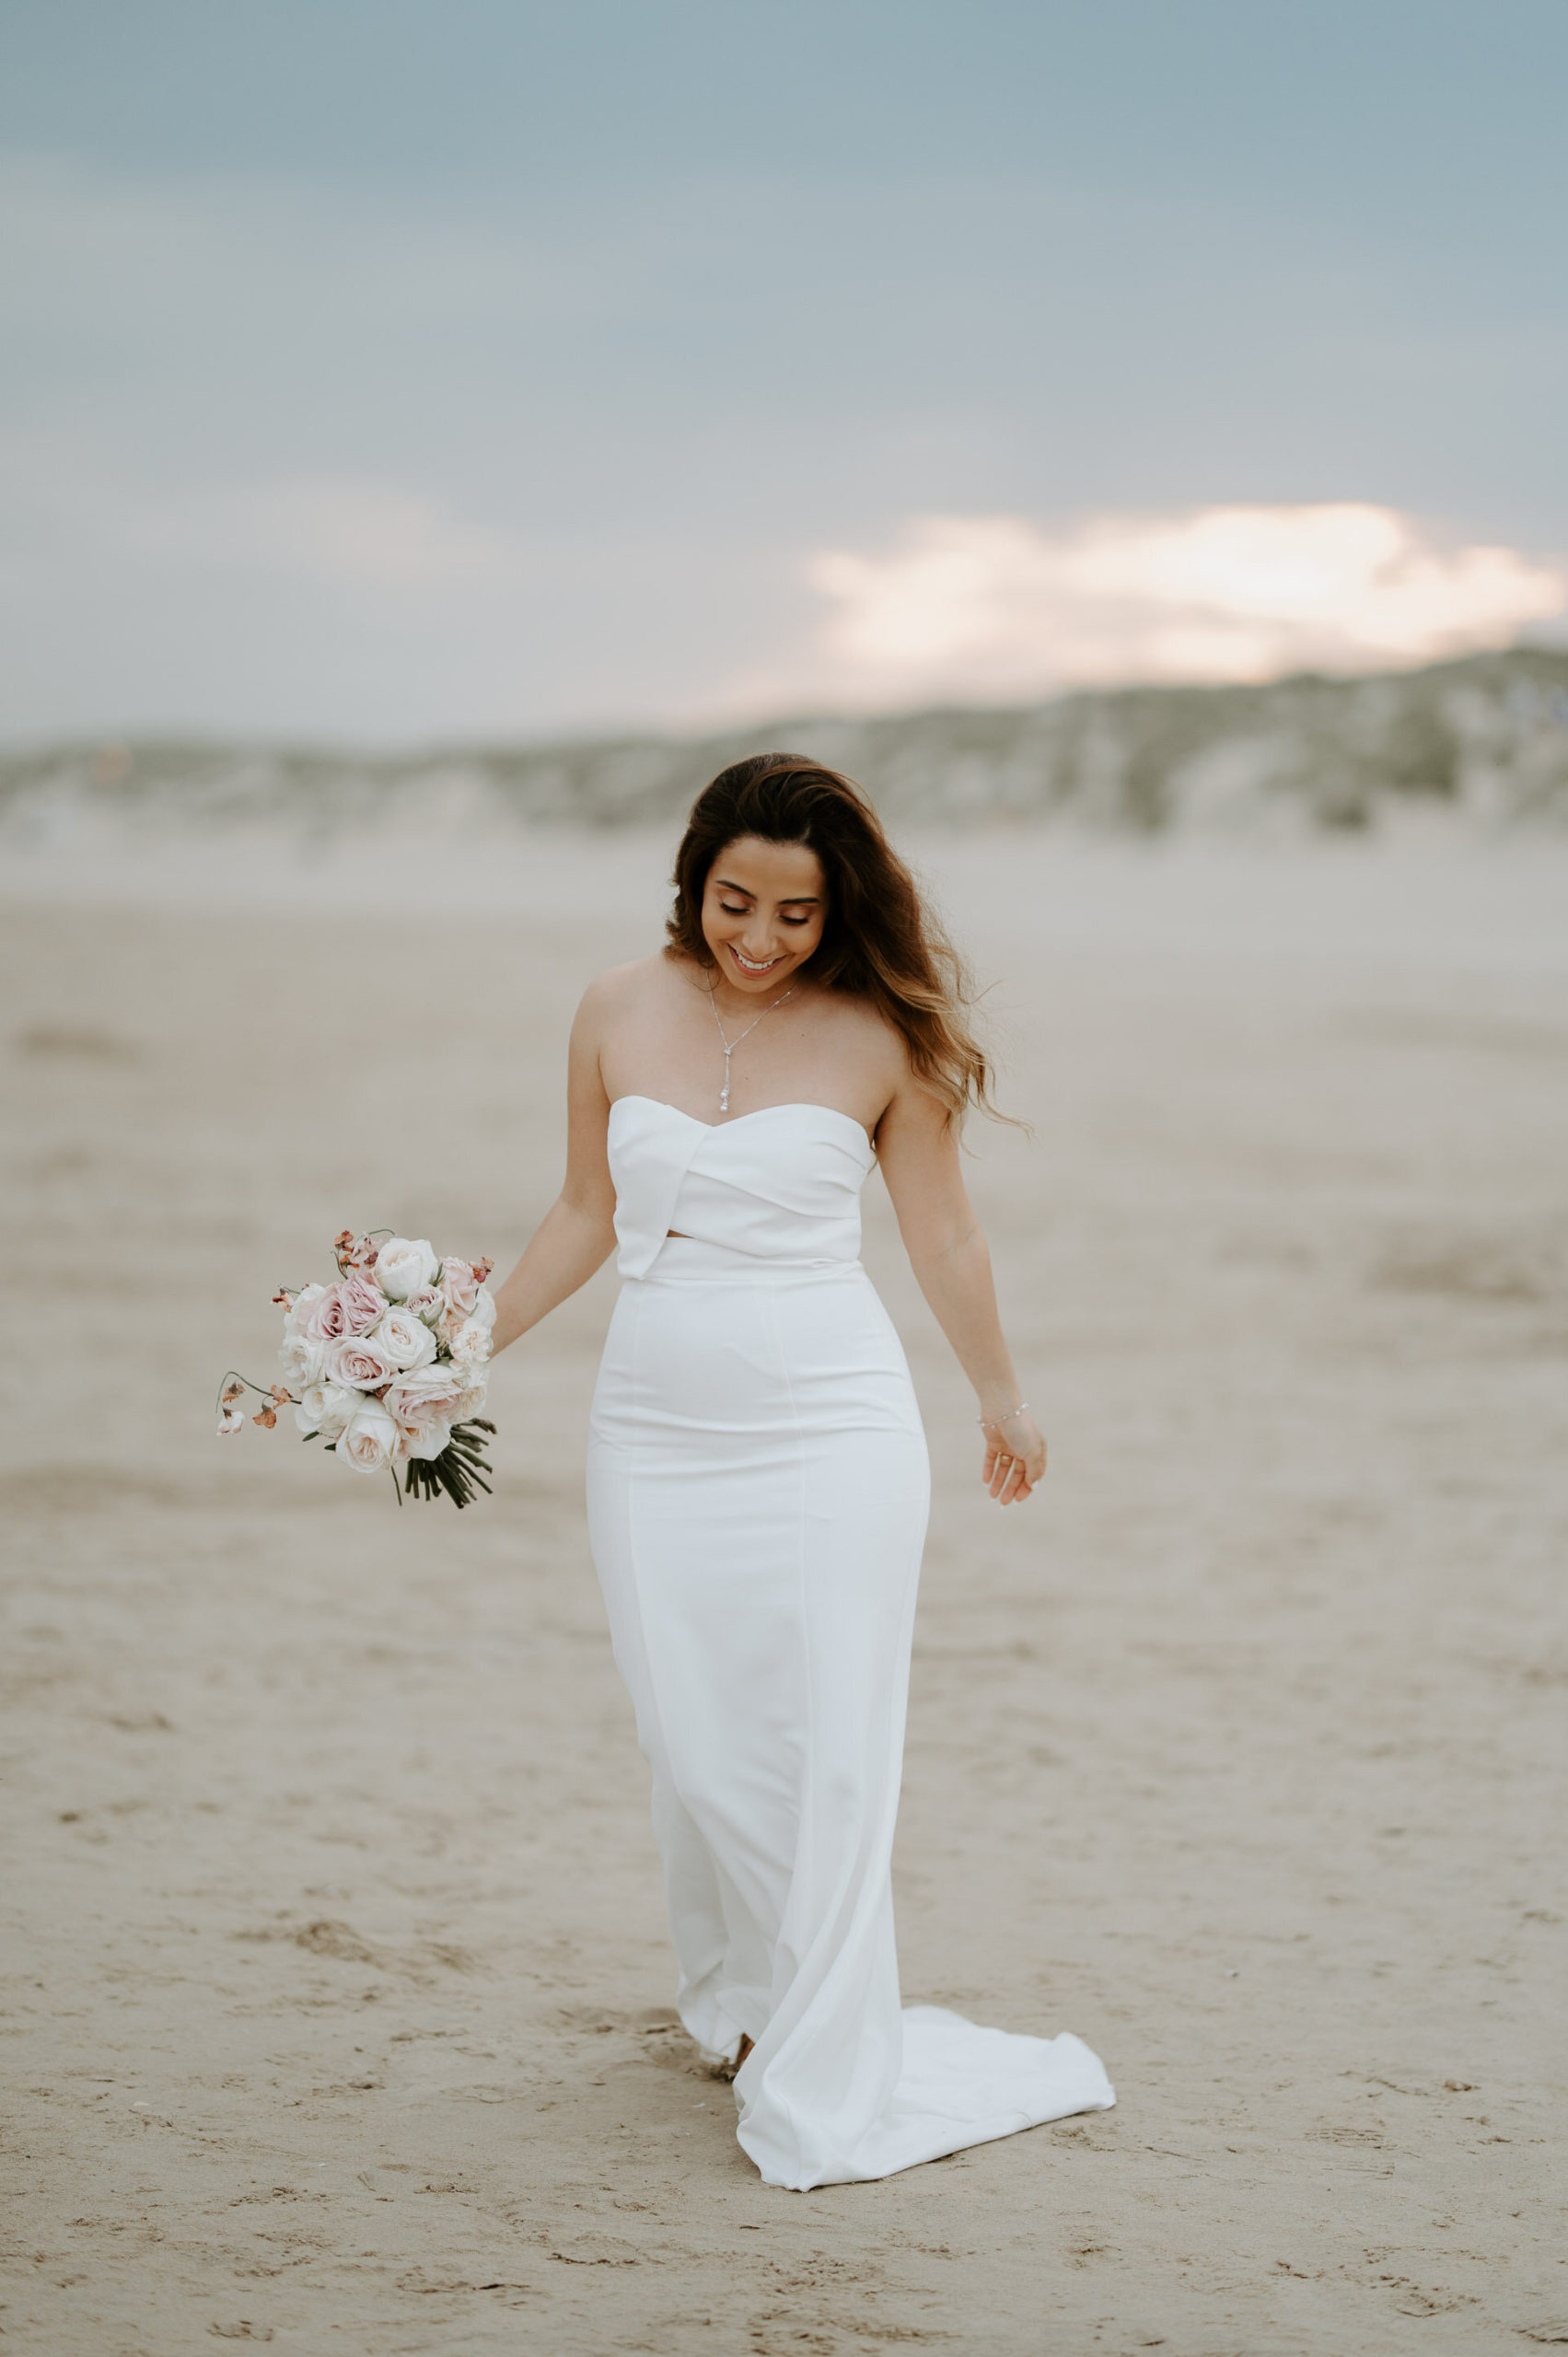 Demiana and Goergeuos - Camber Sands Golden Hour Beach Shoot - Laura Williams Photography-13.jpg